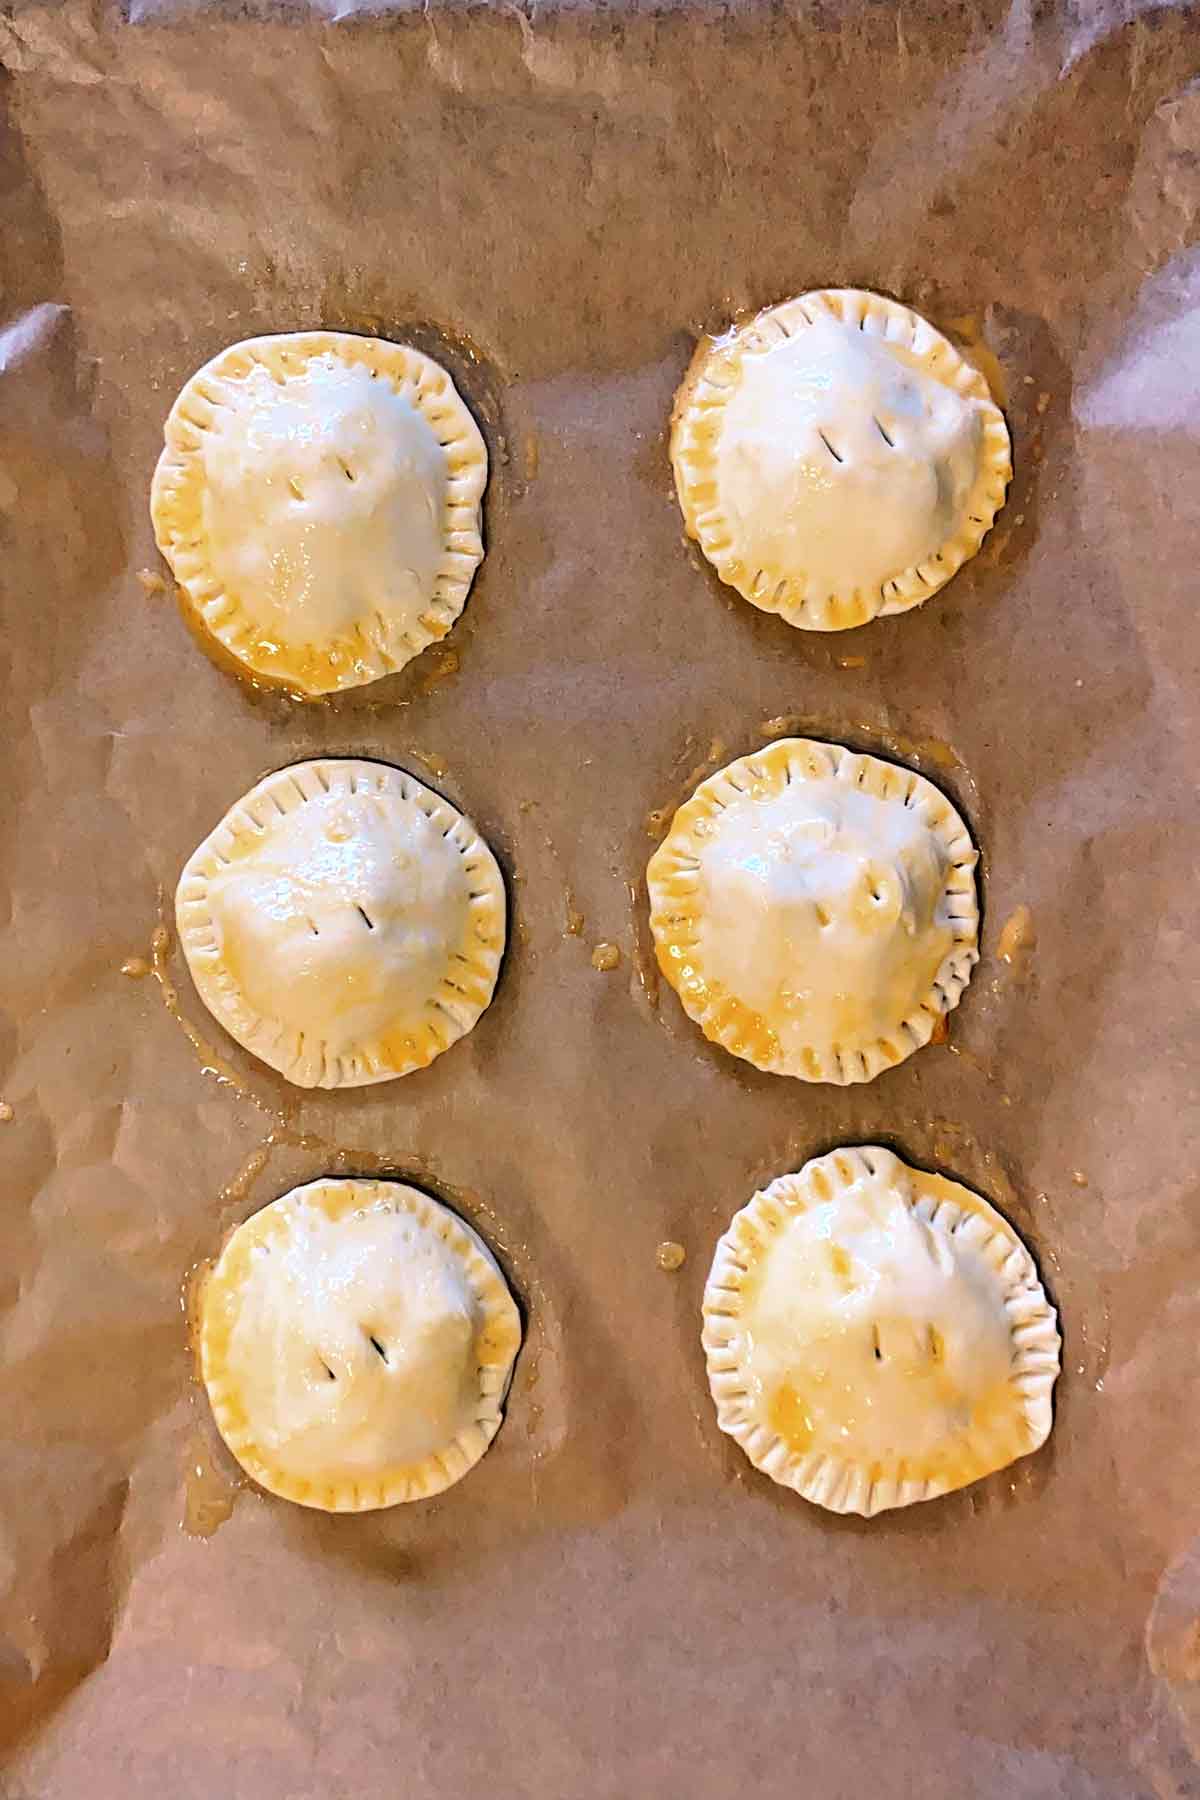 The pies brushed with egg and two holes cut in the top.